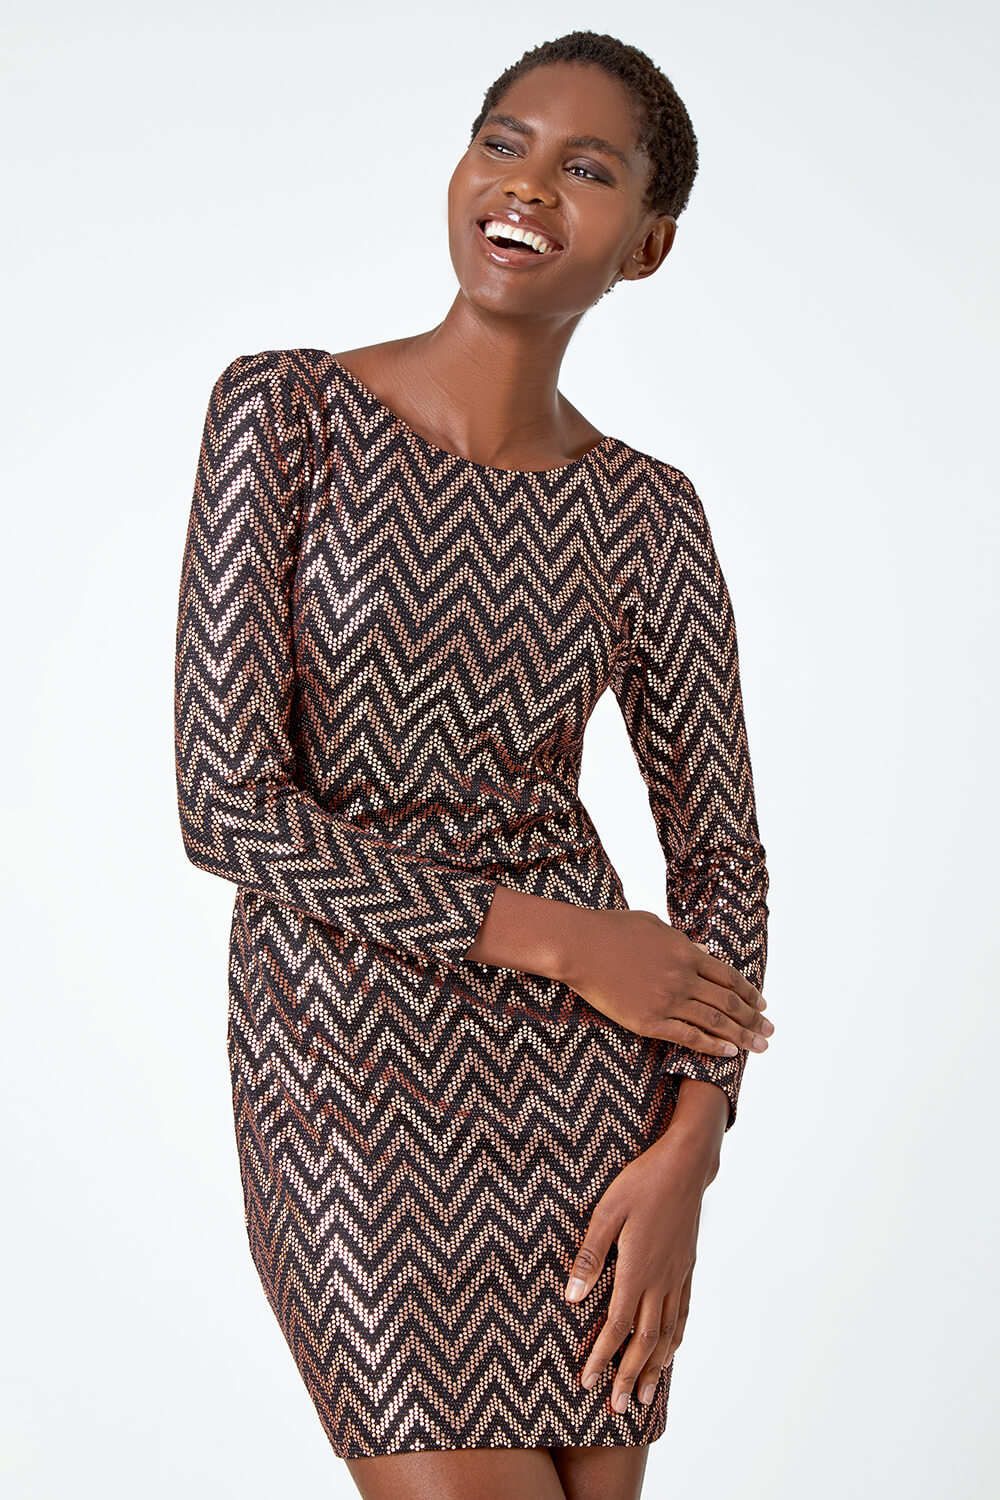 Gold Zig Zag Sequin Stretch Dress, Image 1 of 6